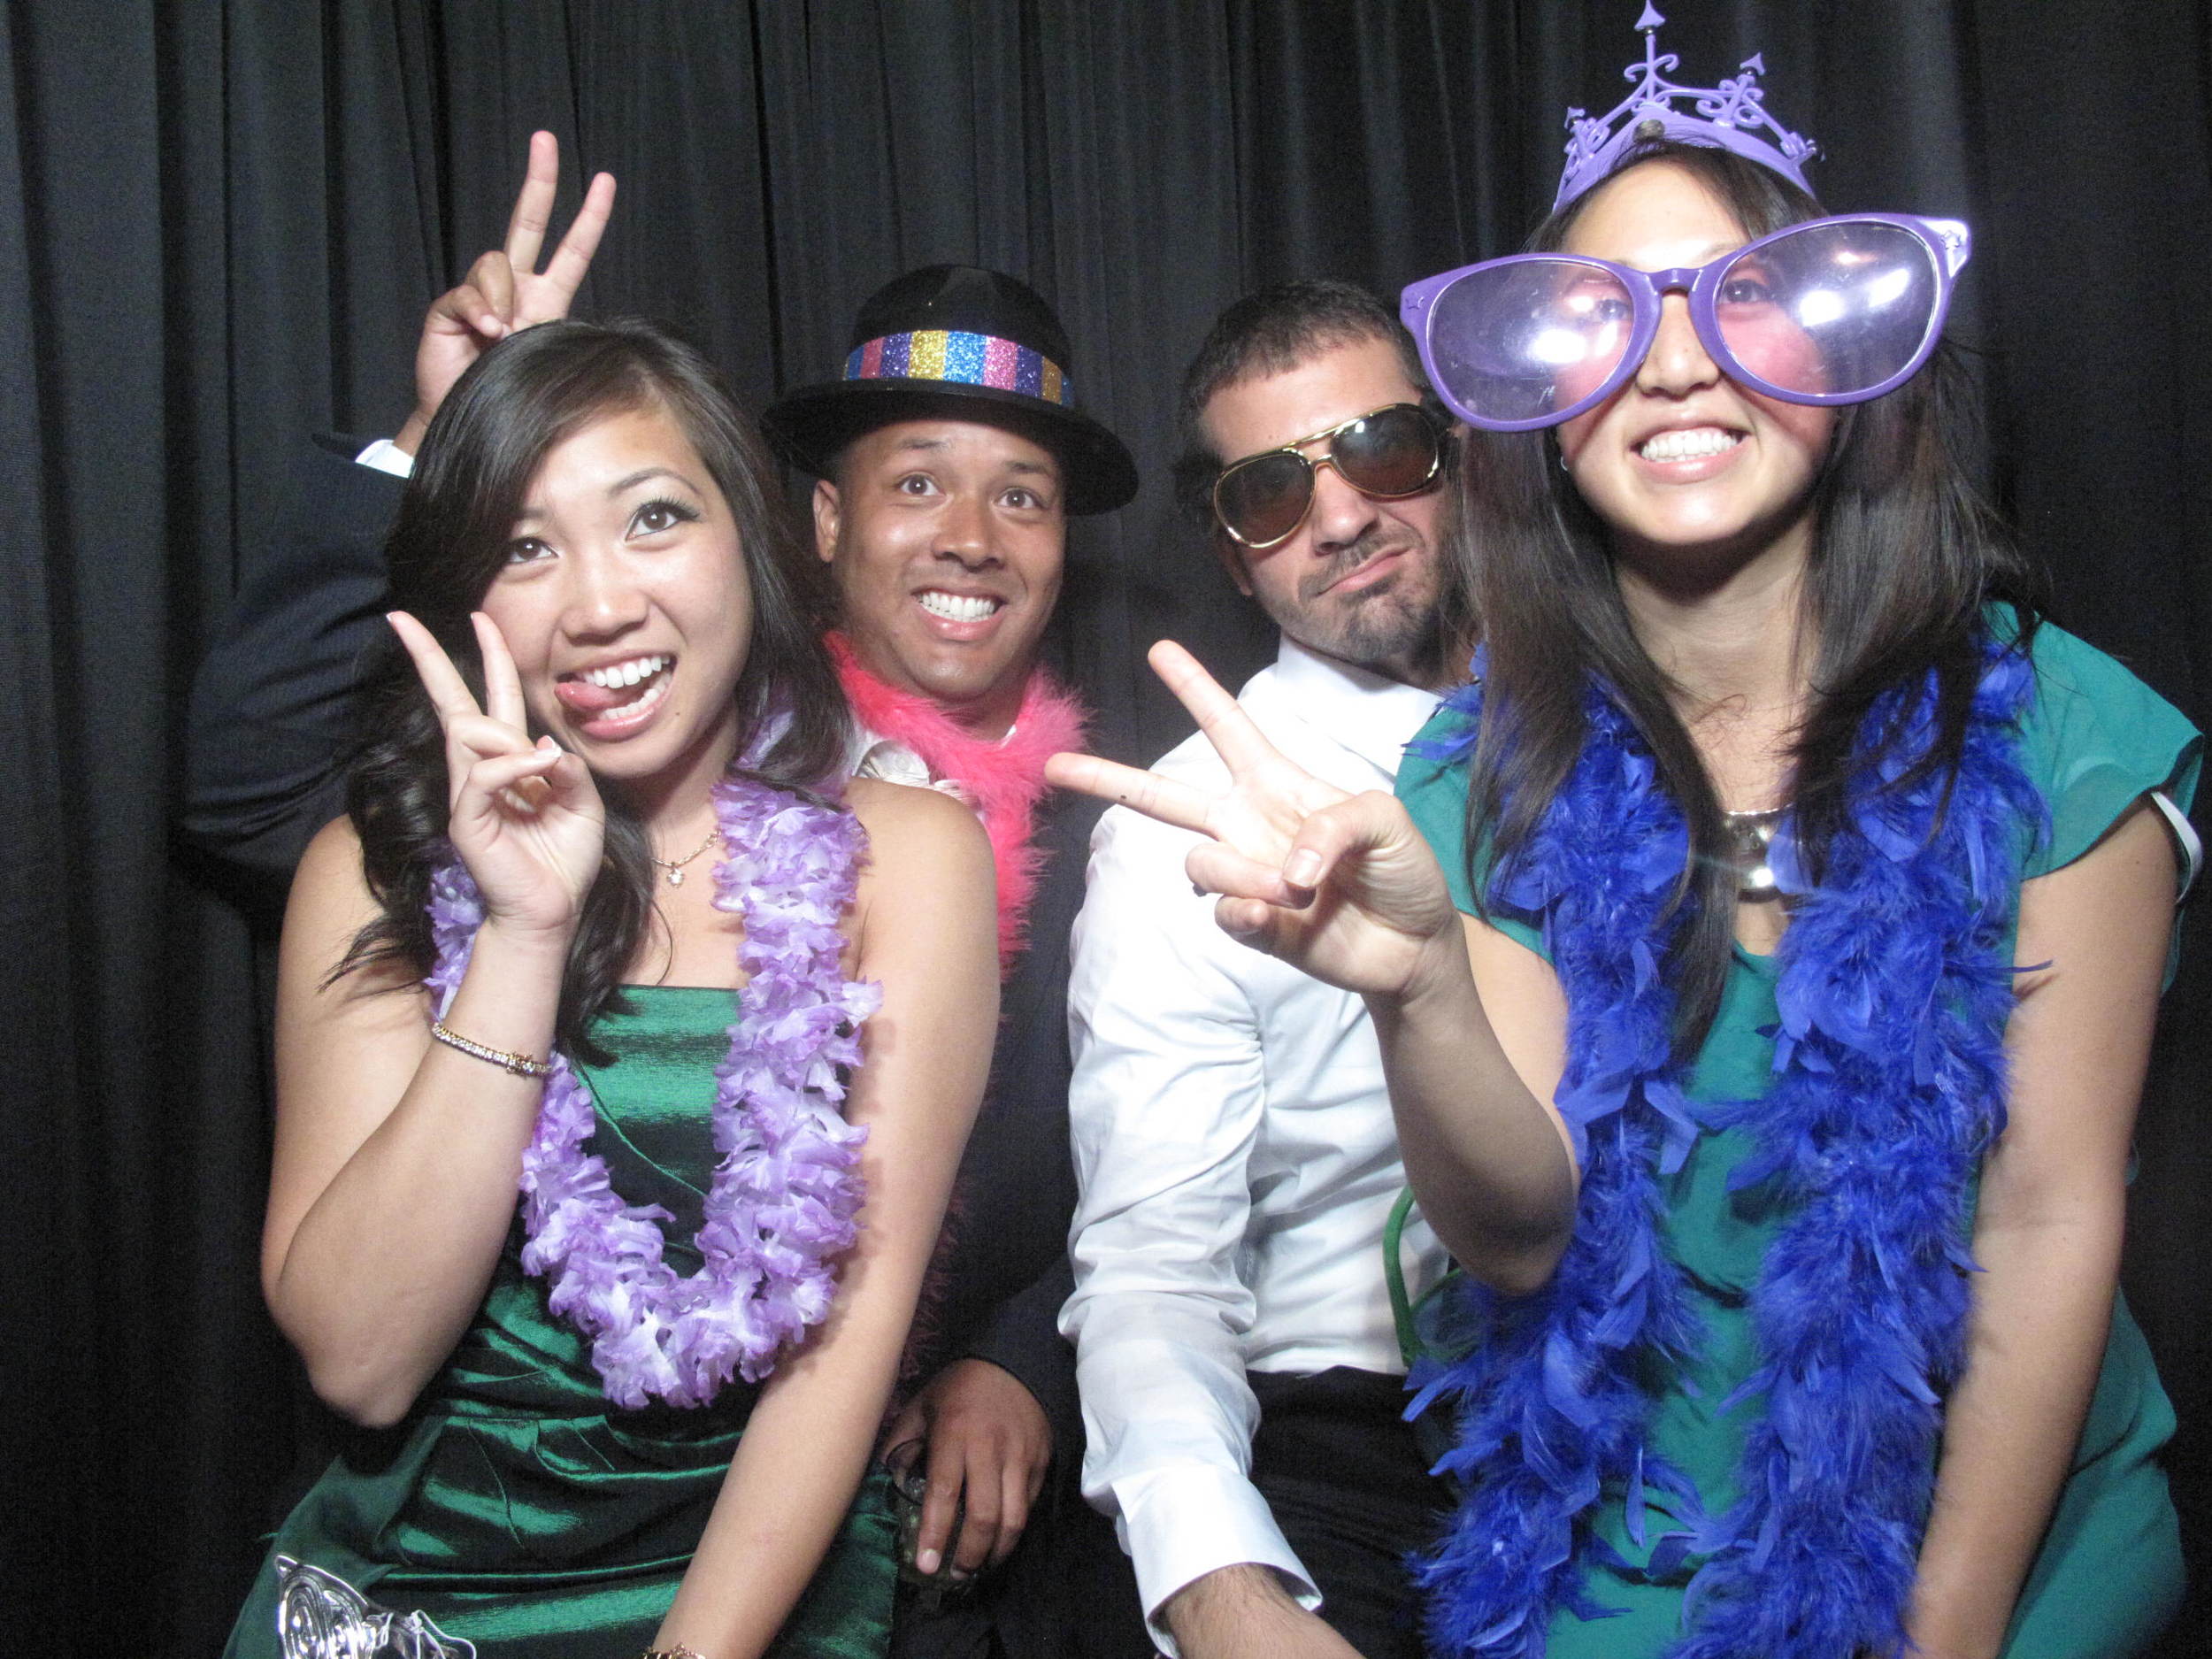 Snapshot Photobooths at The Merion in Cinnaminson, New Jersey